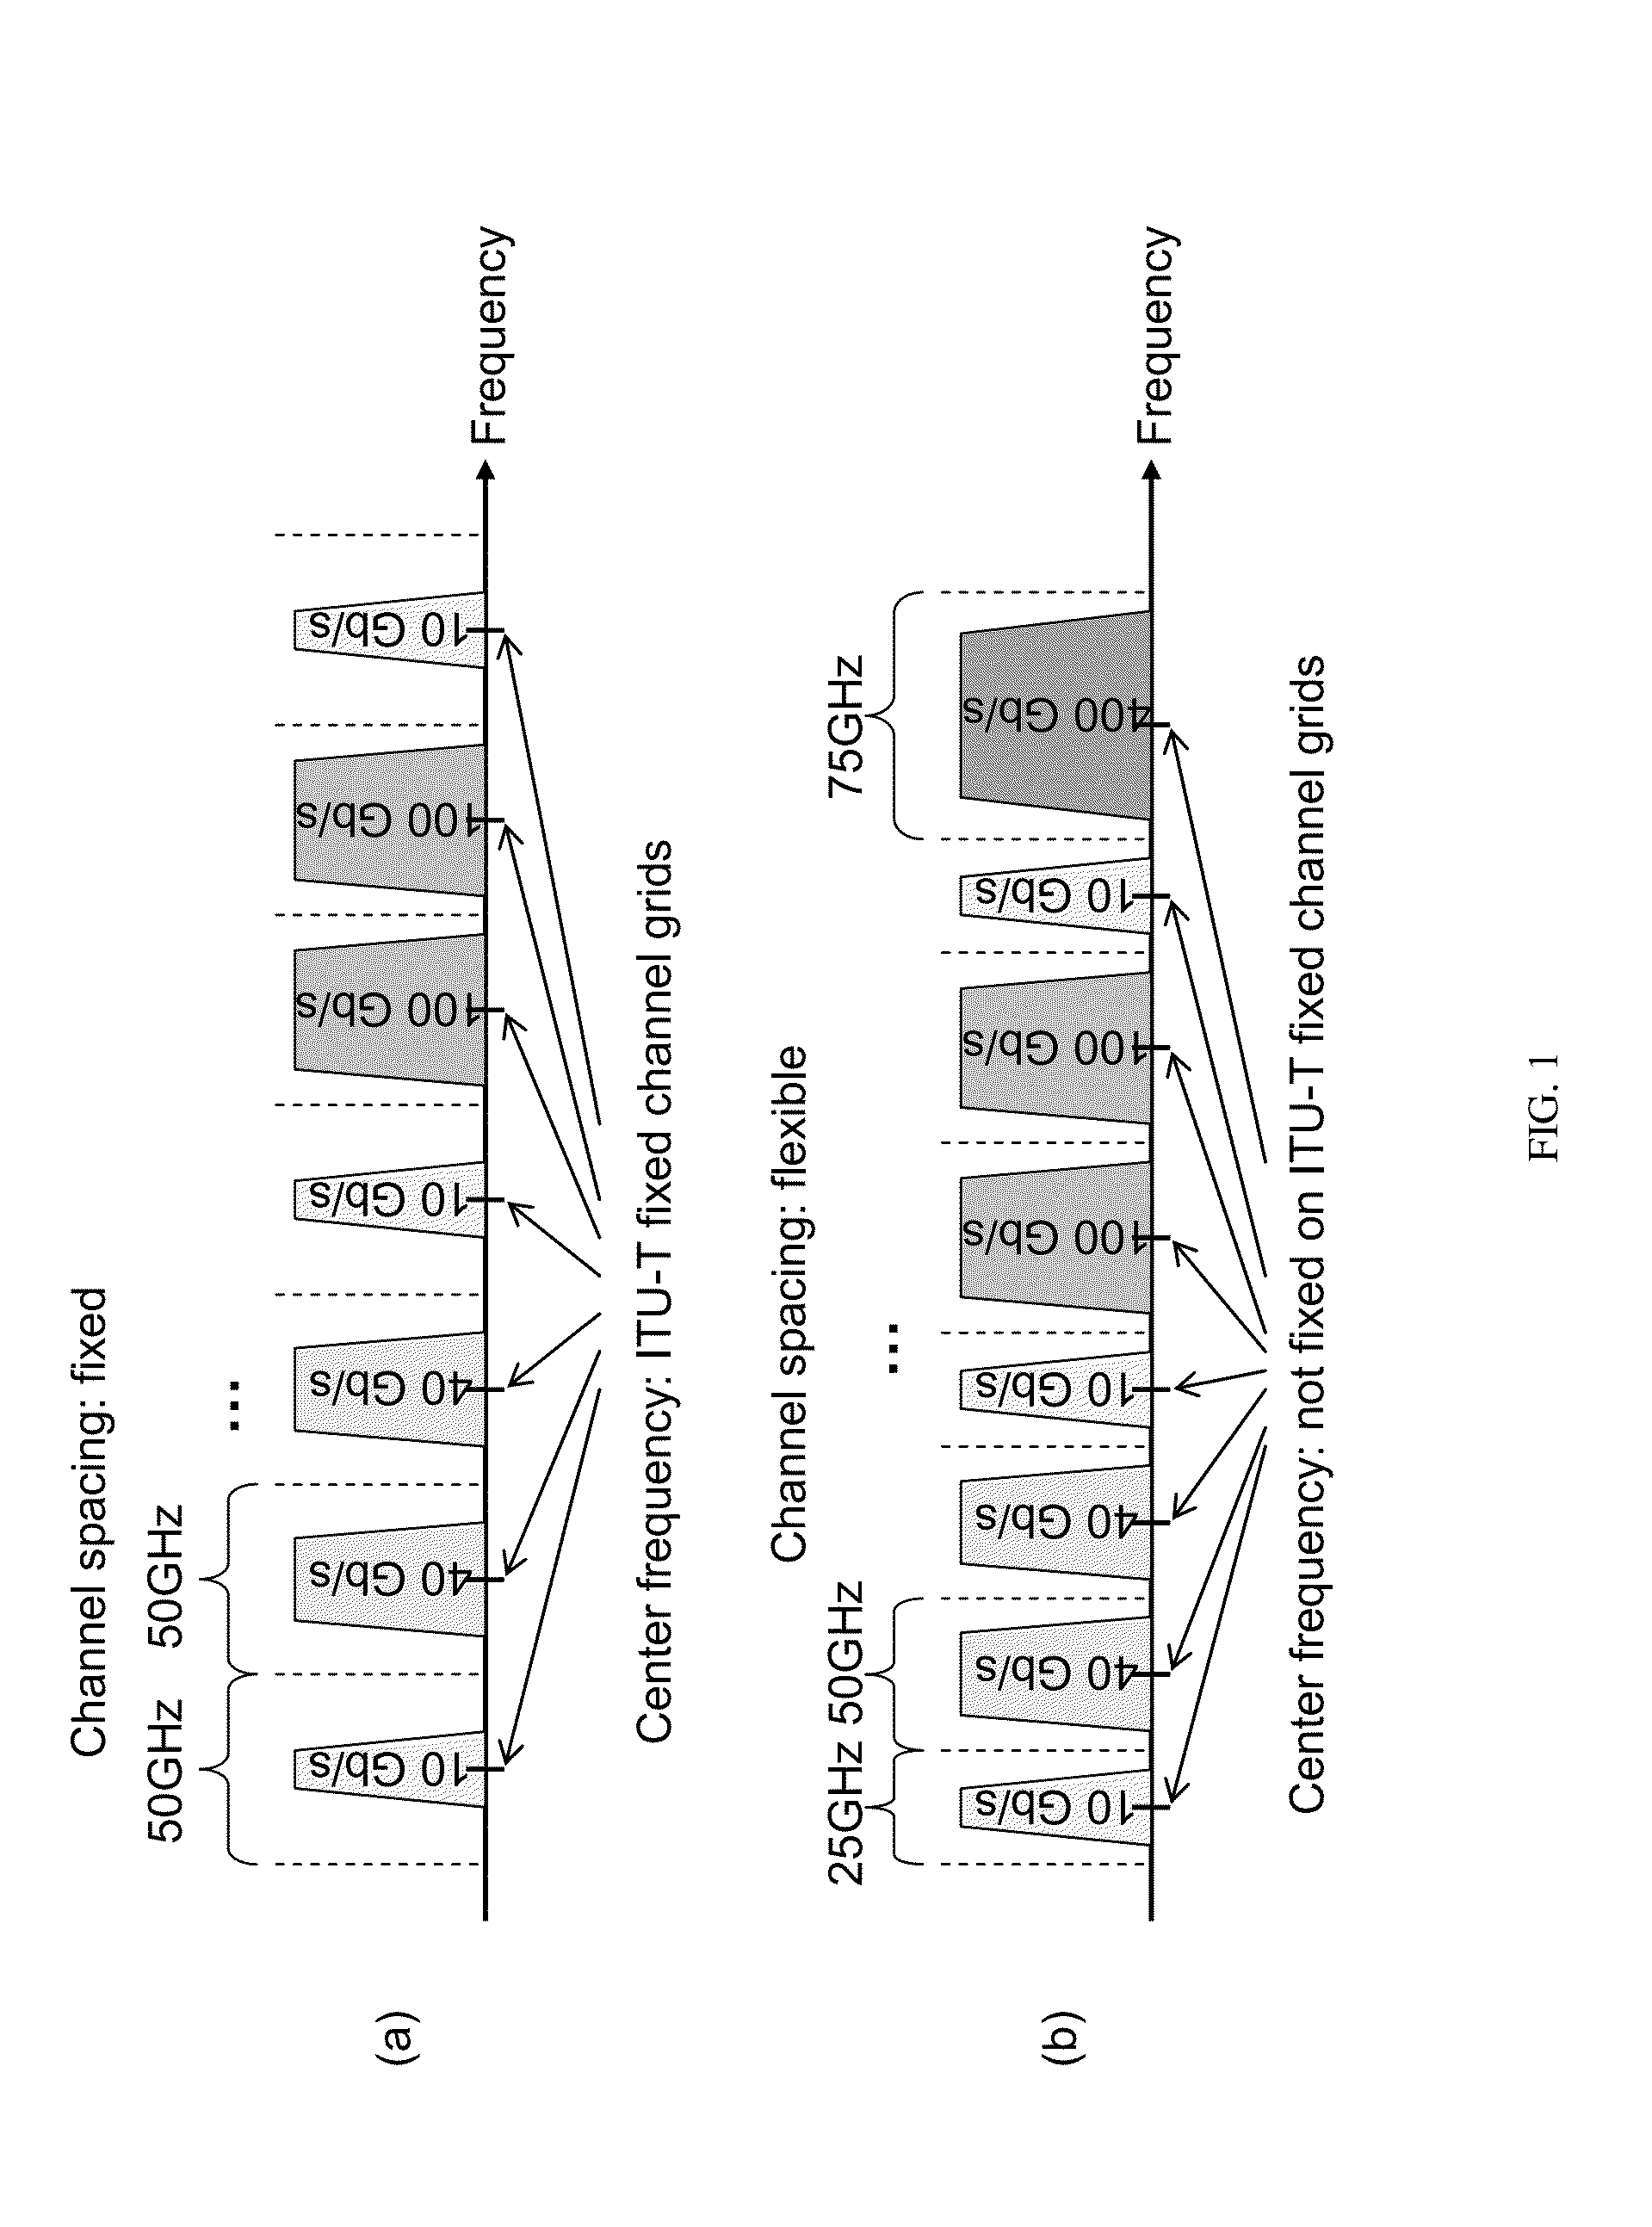 Method for traffic grooming, wavelength assignment and spectrum allocation